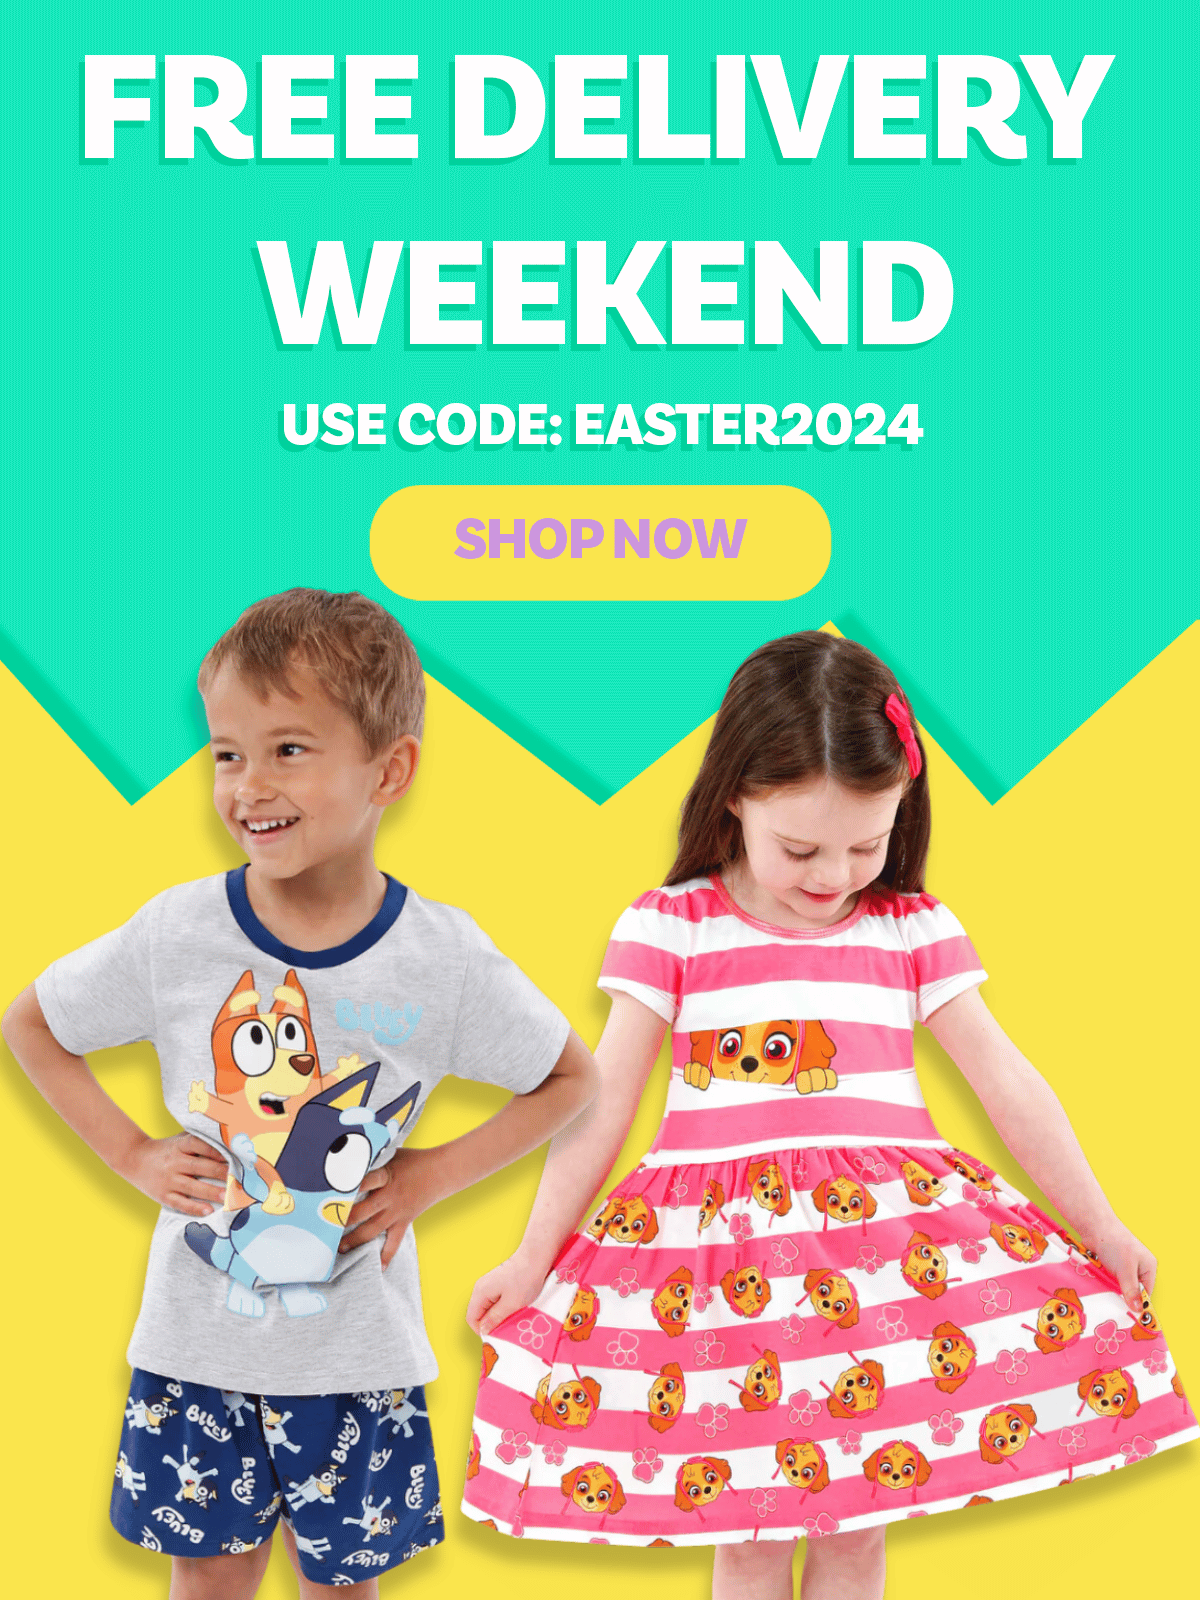 A young by wearing Short Pyjamas featuring Bluey and Bingo and young girl wearing a pink and white striped PAW Patrol short sleeved dress. Free Delivery Weekend. Use Code: EASTER2024. Shop Now.